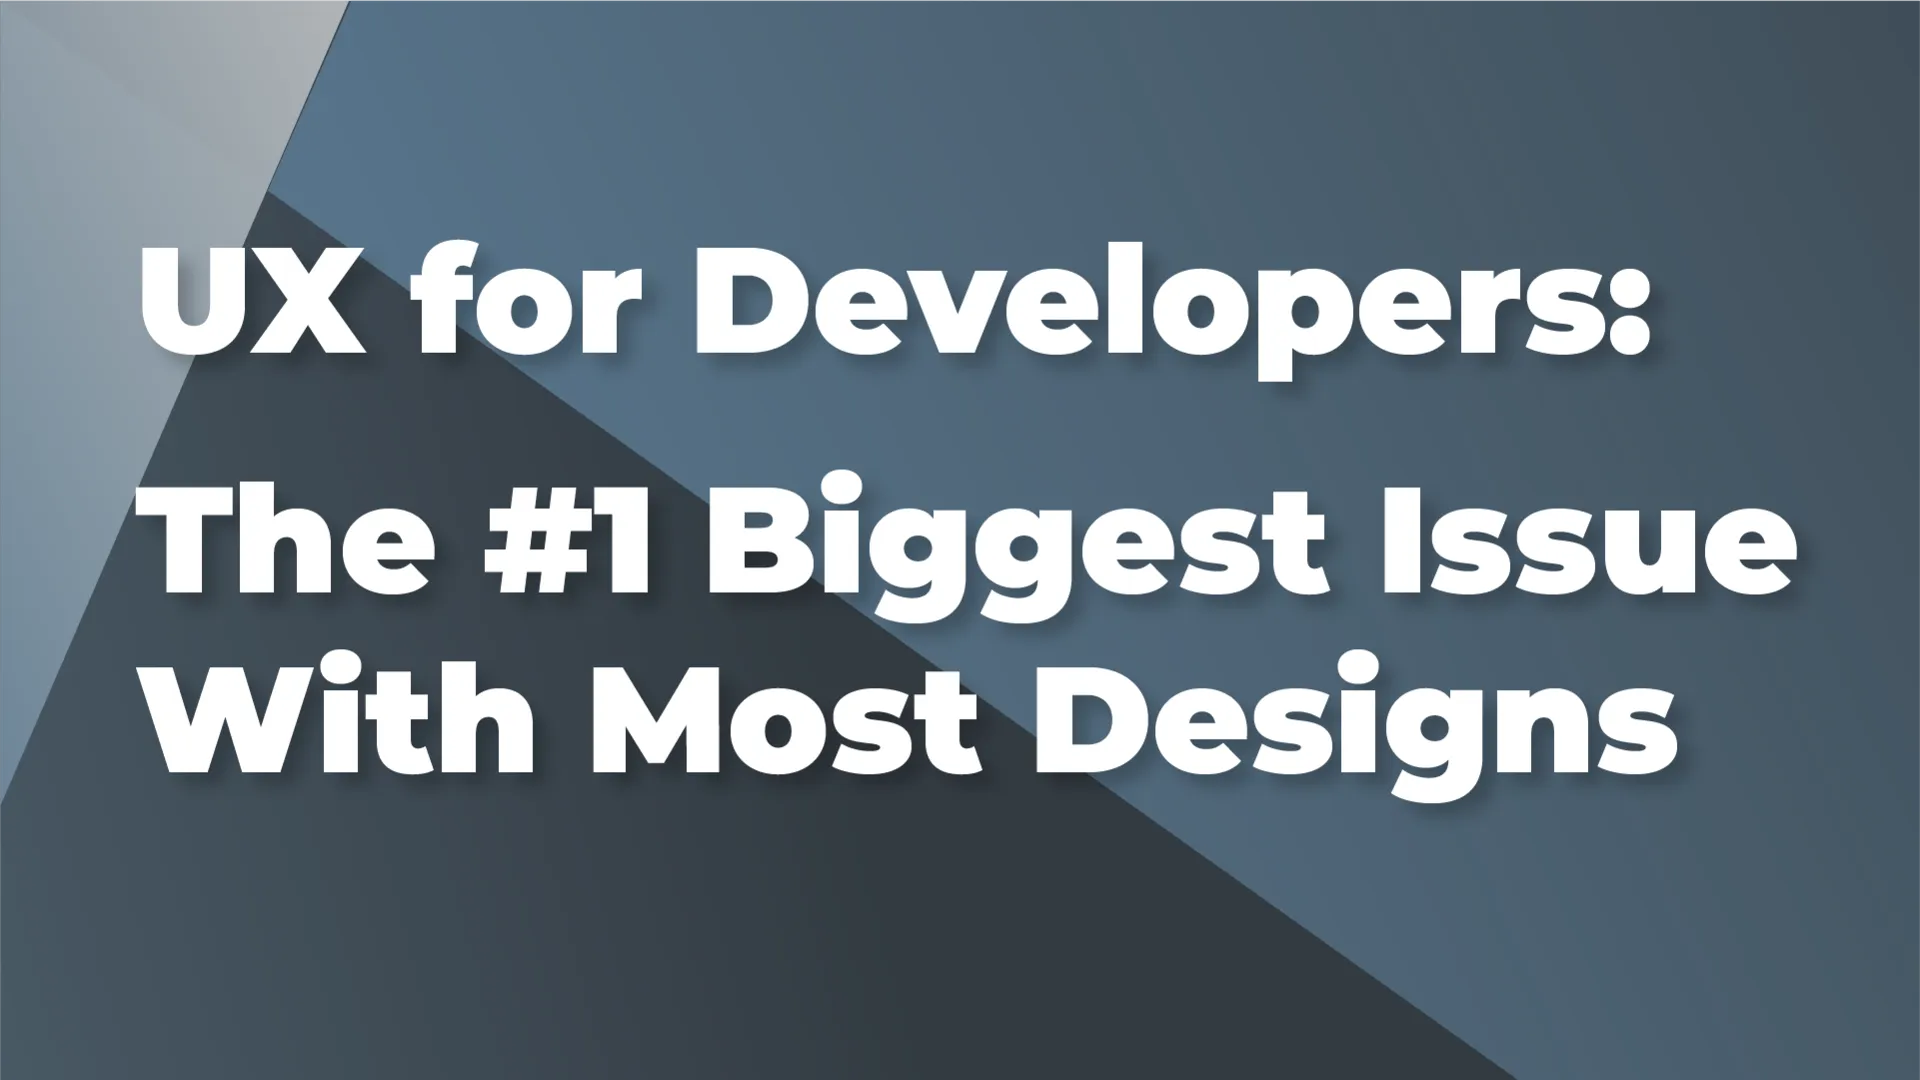 UX for Developers: The #1 Biggest Issue With Most Designs